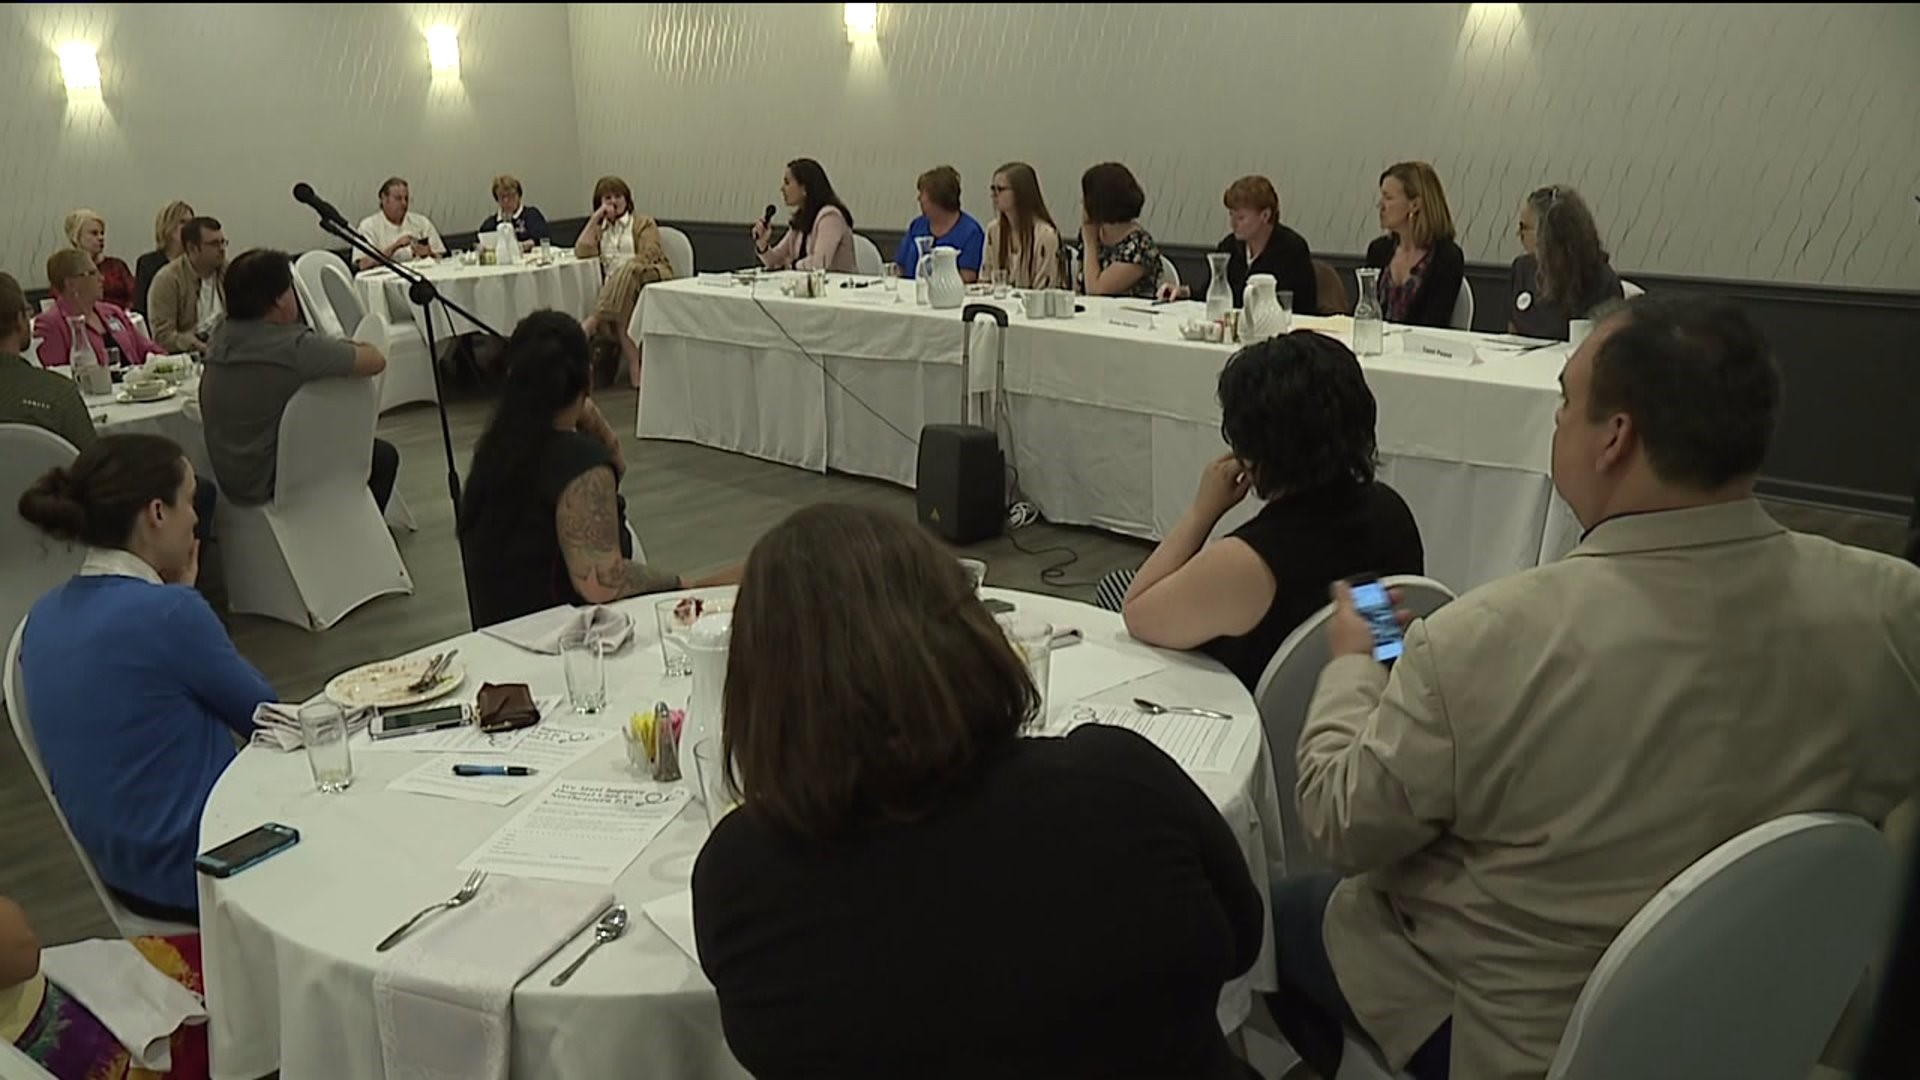 Health Care Workers Discuss Improvements Needed in the Field